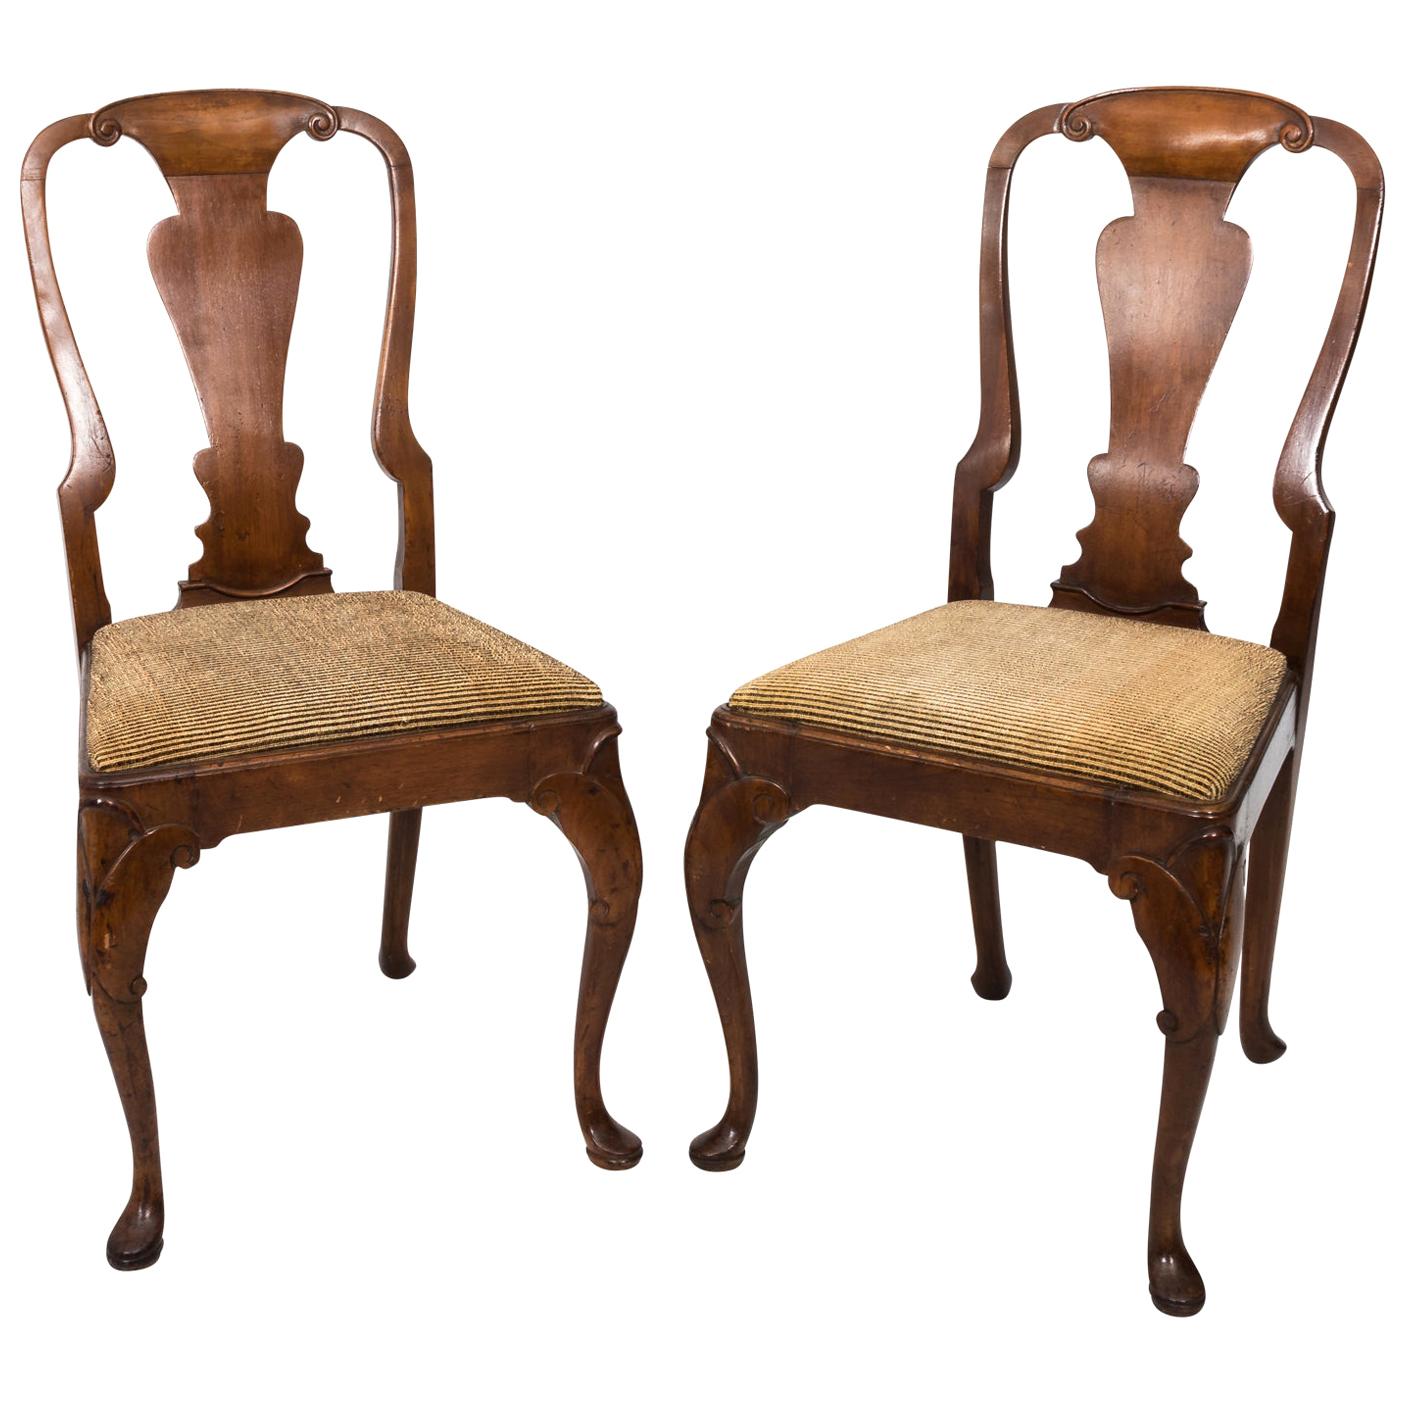 Pair of Early 19th Century Queen Anne Side Chairs